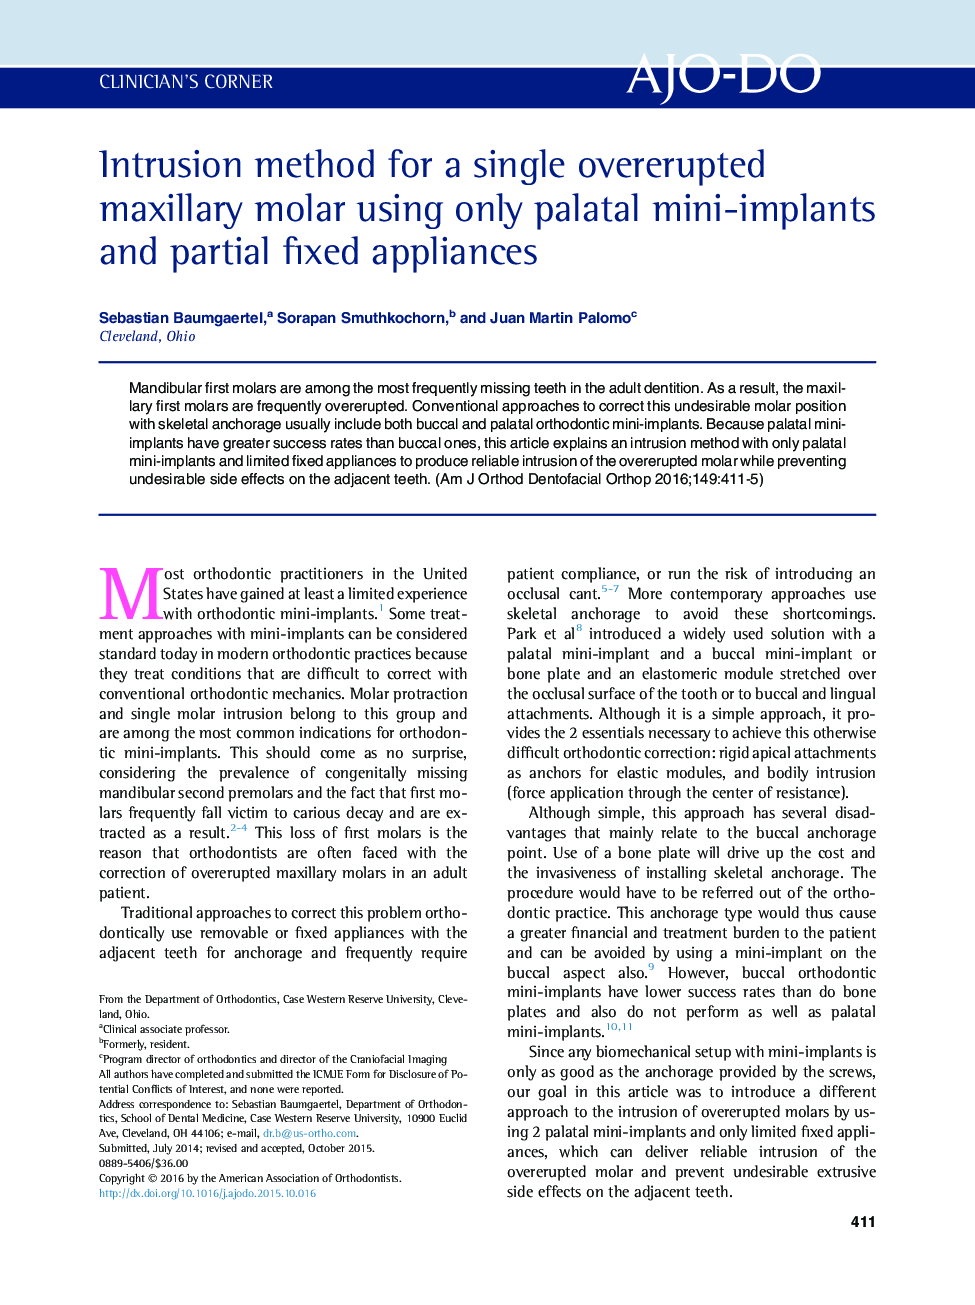 Intrusion method for a single overerupted maxillary molar using only palatal mini-implants and partial fixed appliances 